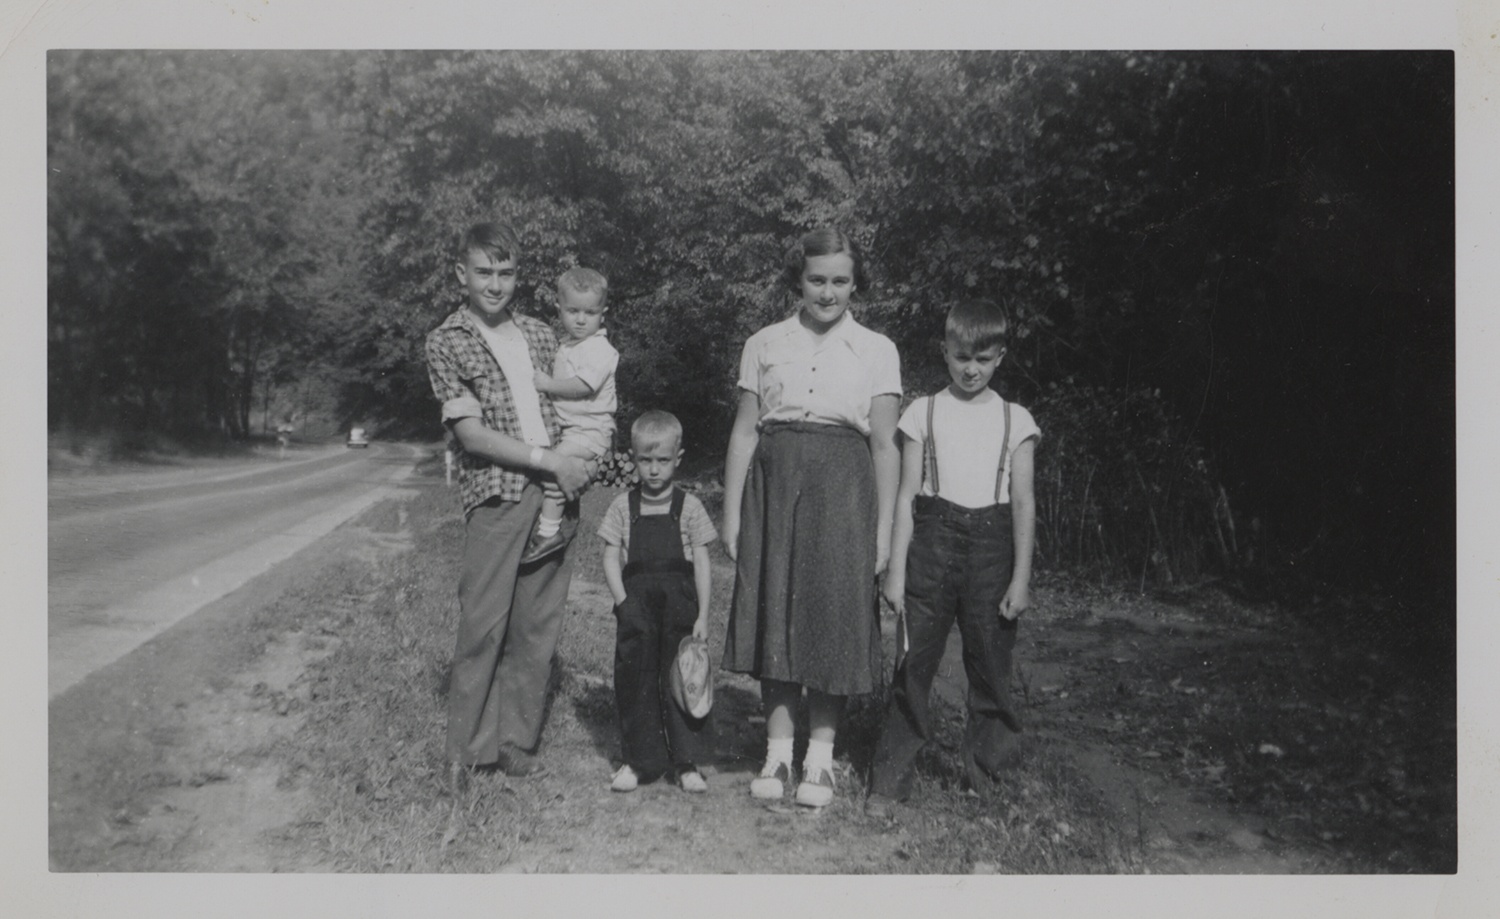 Paul posing with his siblings in the summer of 1954 alongside a road. Left to right: Paul, Alan, Glen, Mary Ellen, and George Dick. Holly and Paul Dick Family Papers and Photographs, MSS 1177, Detre Library & Archives at the History Center.